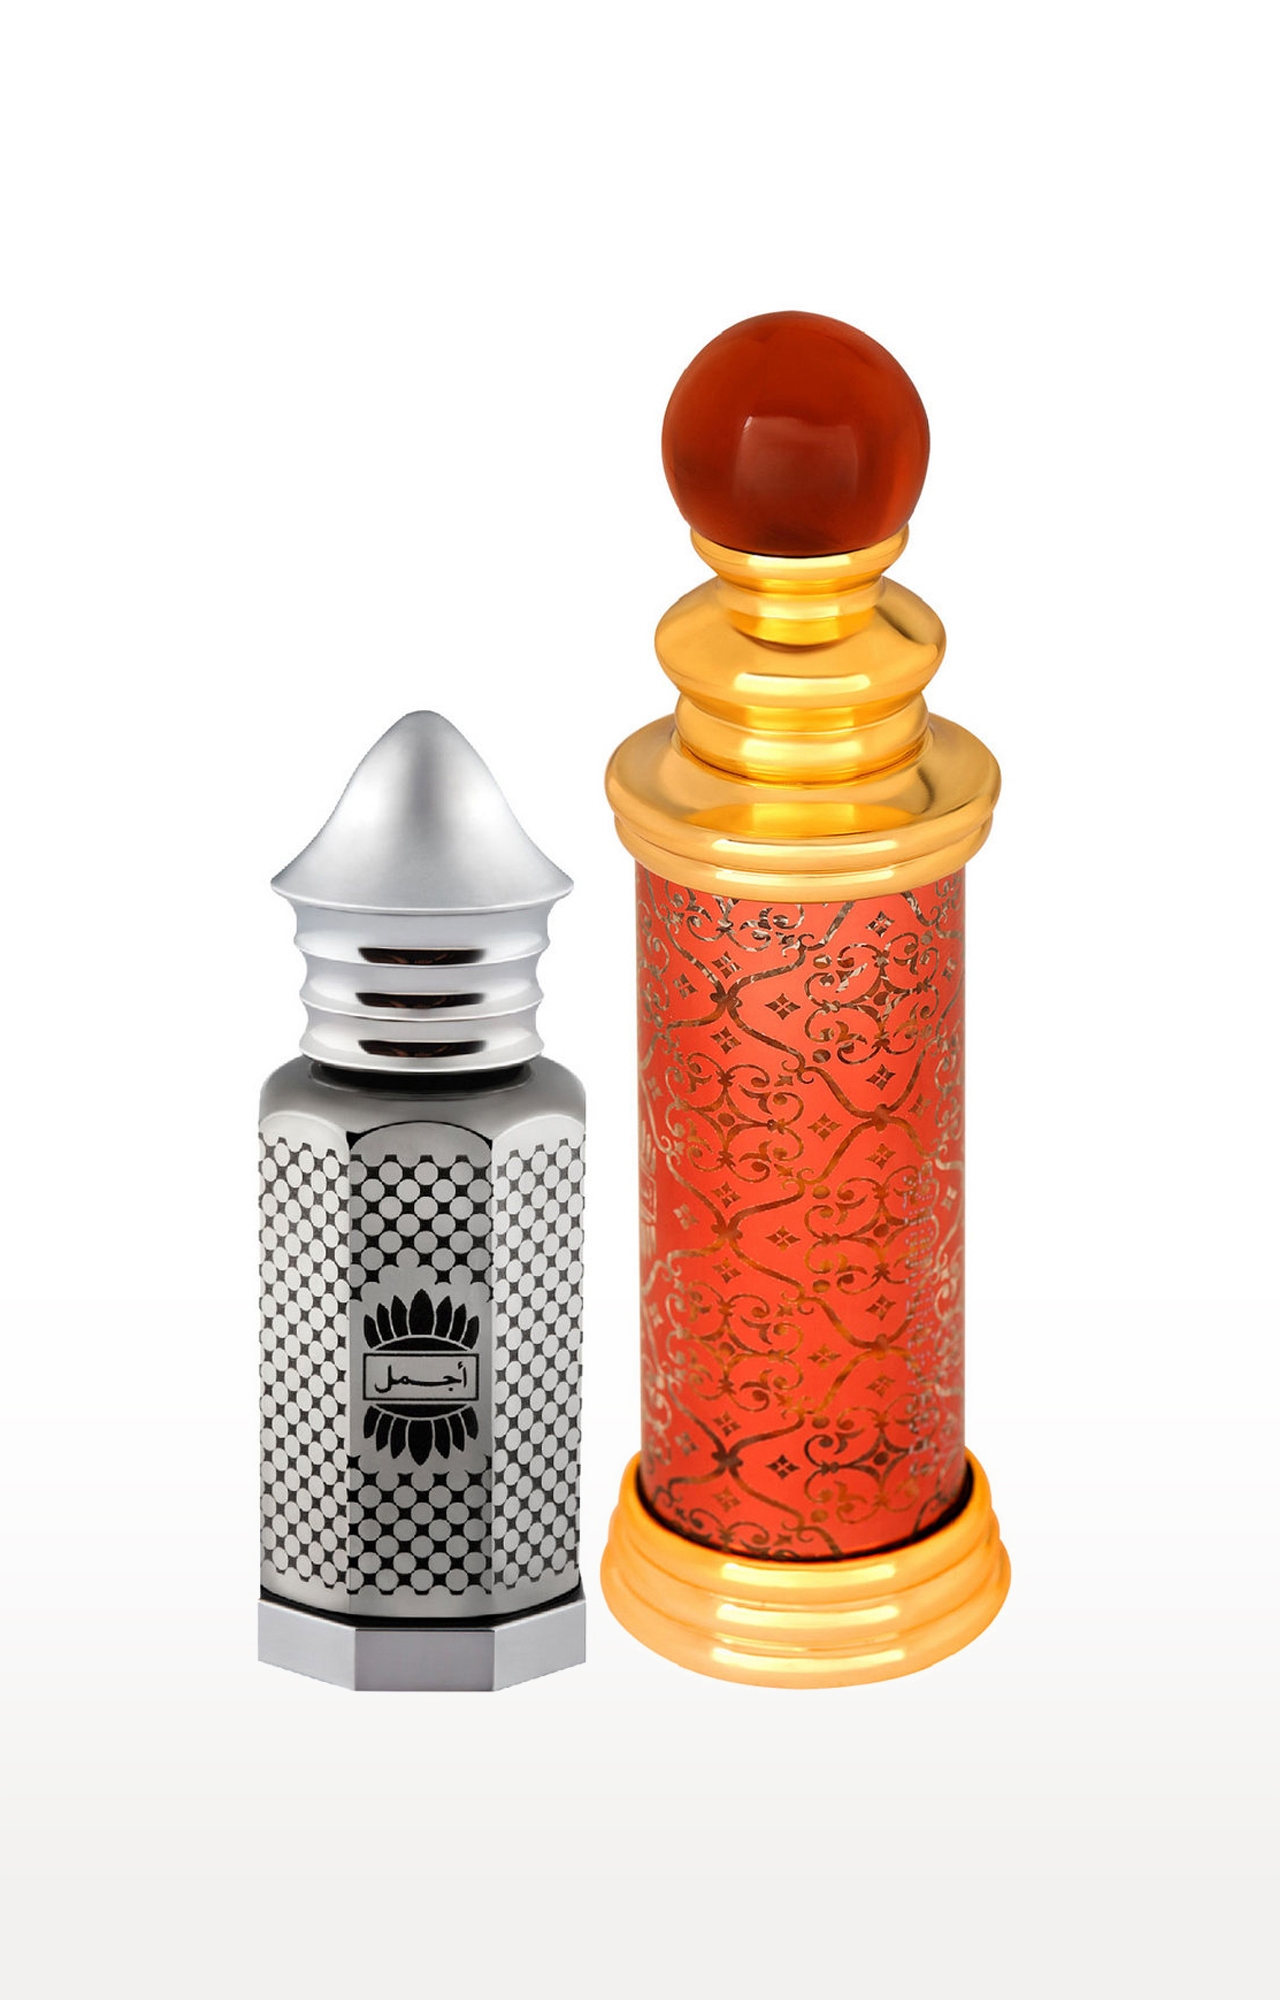 Ajmal | Ajmal Asher Concentrated Perfume Oil Oriental Alcohol-free Attar 12ml for Unisex and Classic Oud Concentrated Perfume Oil Woody Oudh Alcohol-free Attar 10ml for Unisex + 2 Parfum Testers FREE